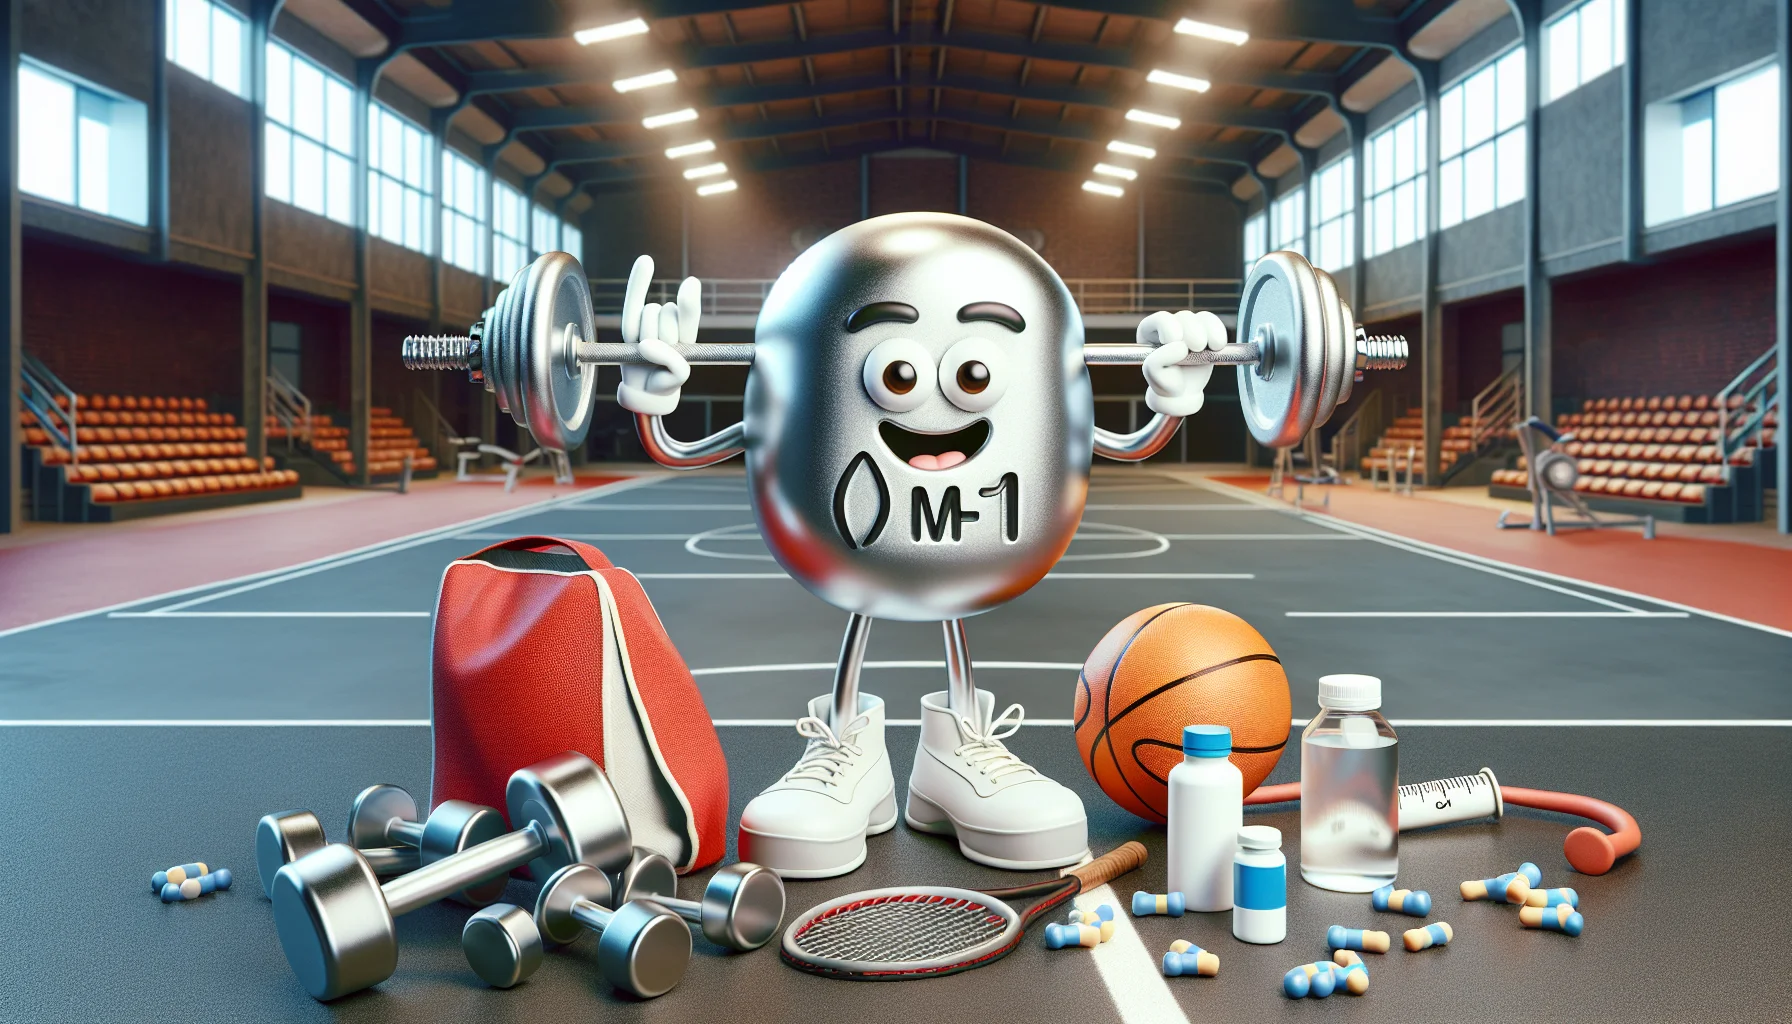 Create a humorous image that portrays a magnesium ion personified as a cartoon character, showing off its positive charge. This quirky ion is surrounded by athletic gear such as dumbbells, a basketball, and a tennis racket. The image has a background of a gym or sports complex. The scene implicitly suggests that intake of magnesium supplements might benefit those who partake in sports and fitness activities. Ensure the representation is playful and lighthearted, inviting viewers to learn more about the benefits of magnesium supplements in sports nutrition.